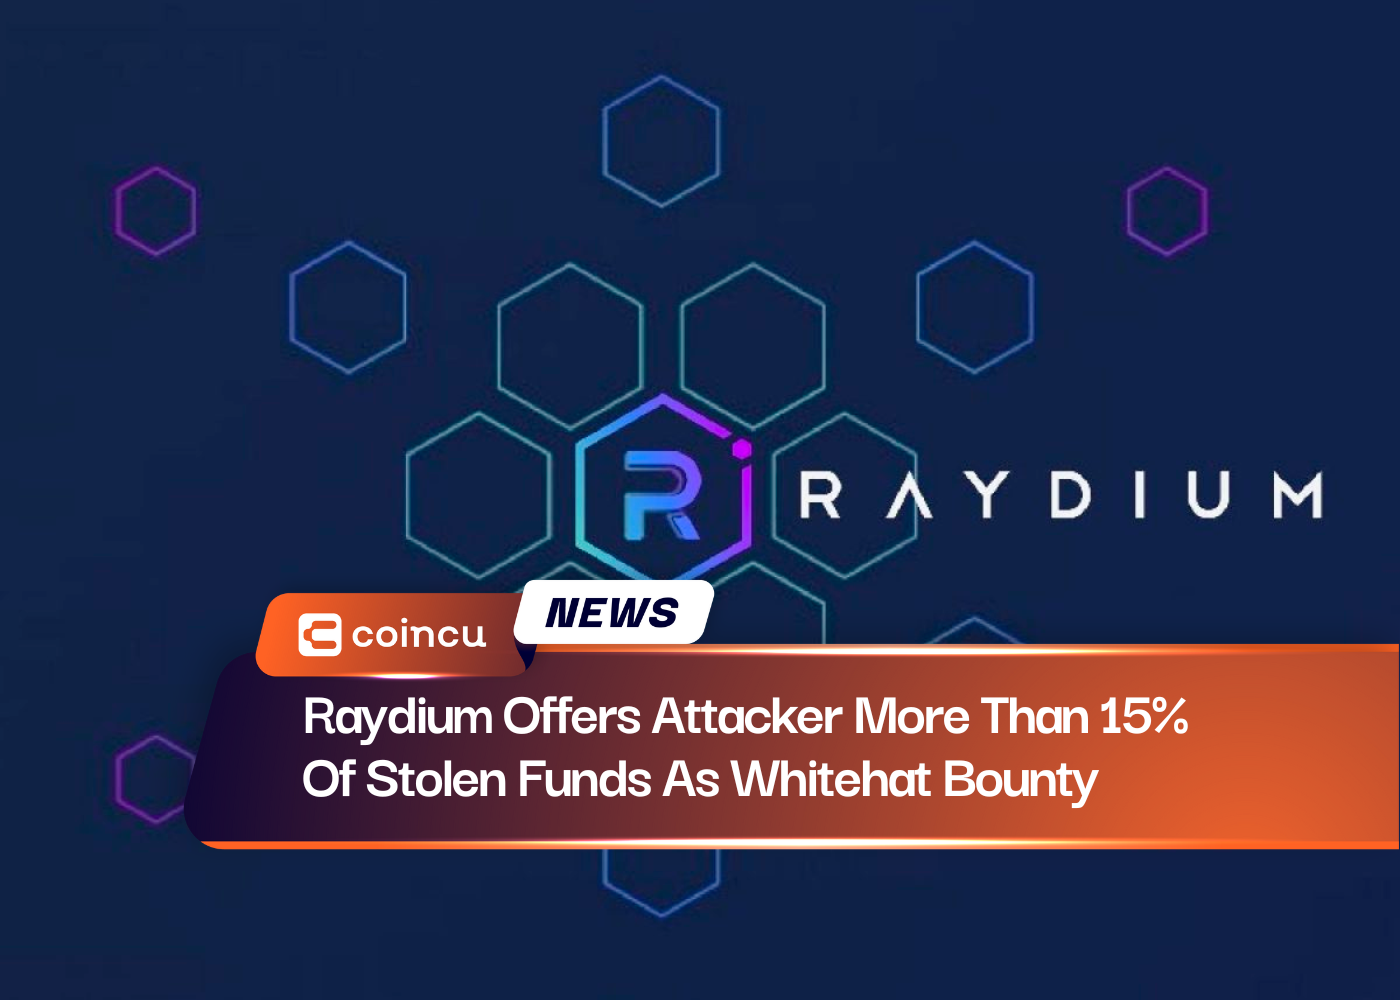 Raydium Offers Attacker More Than 15% Of Stolen Funds As Whitehat Bounty